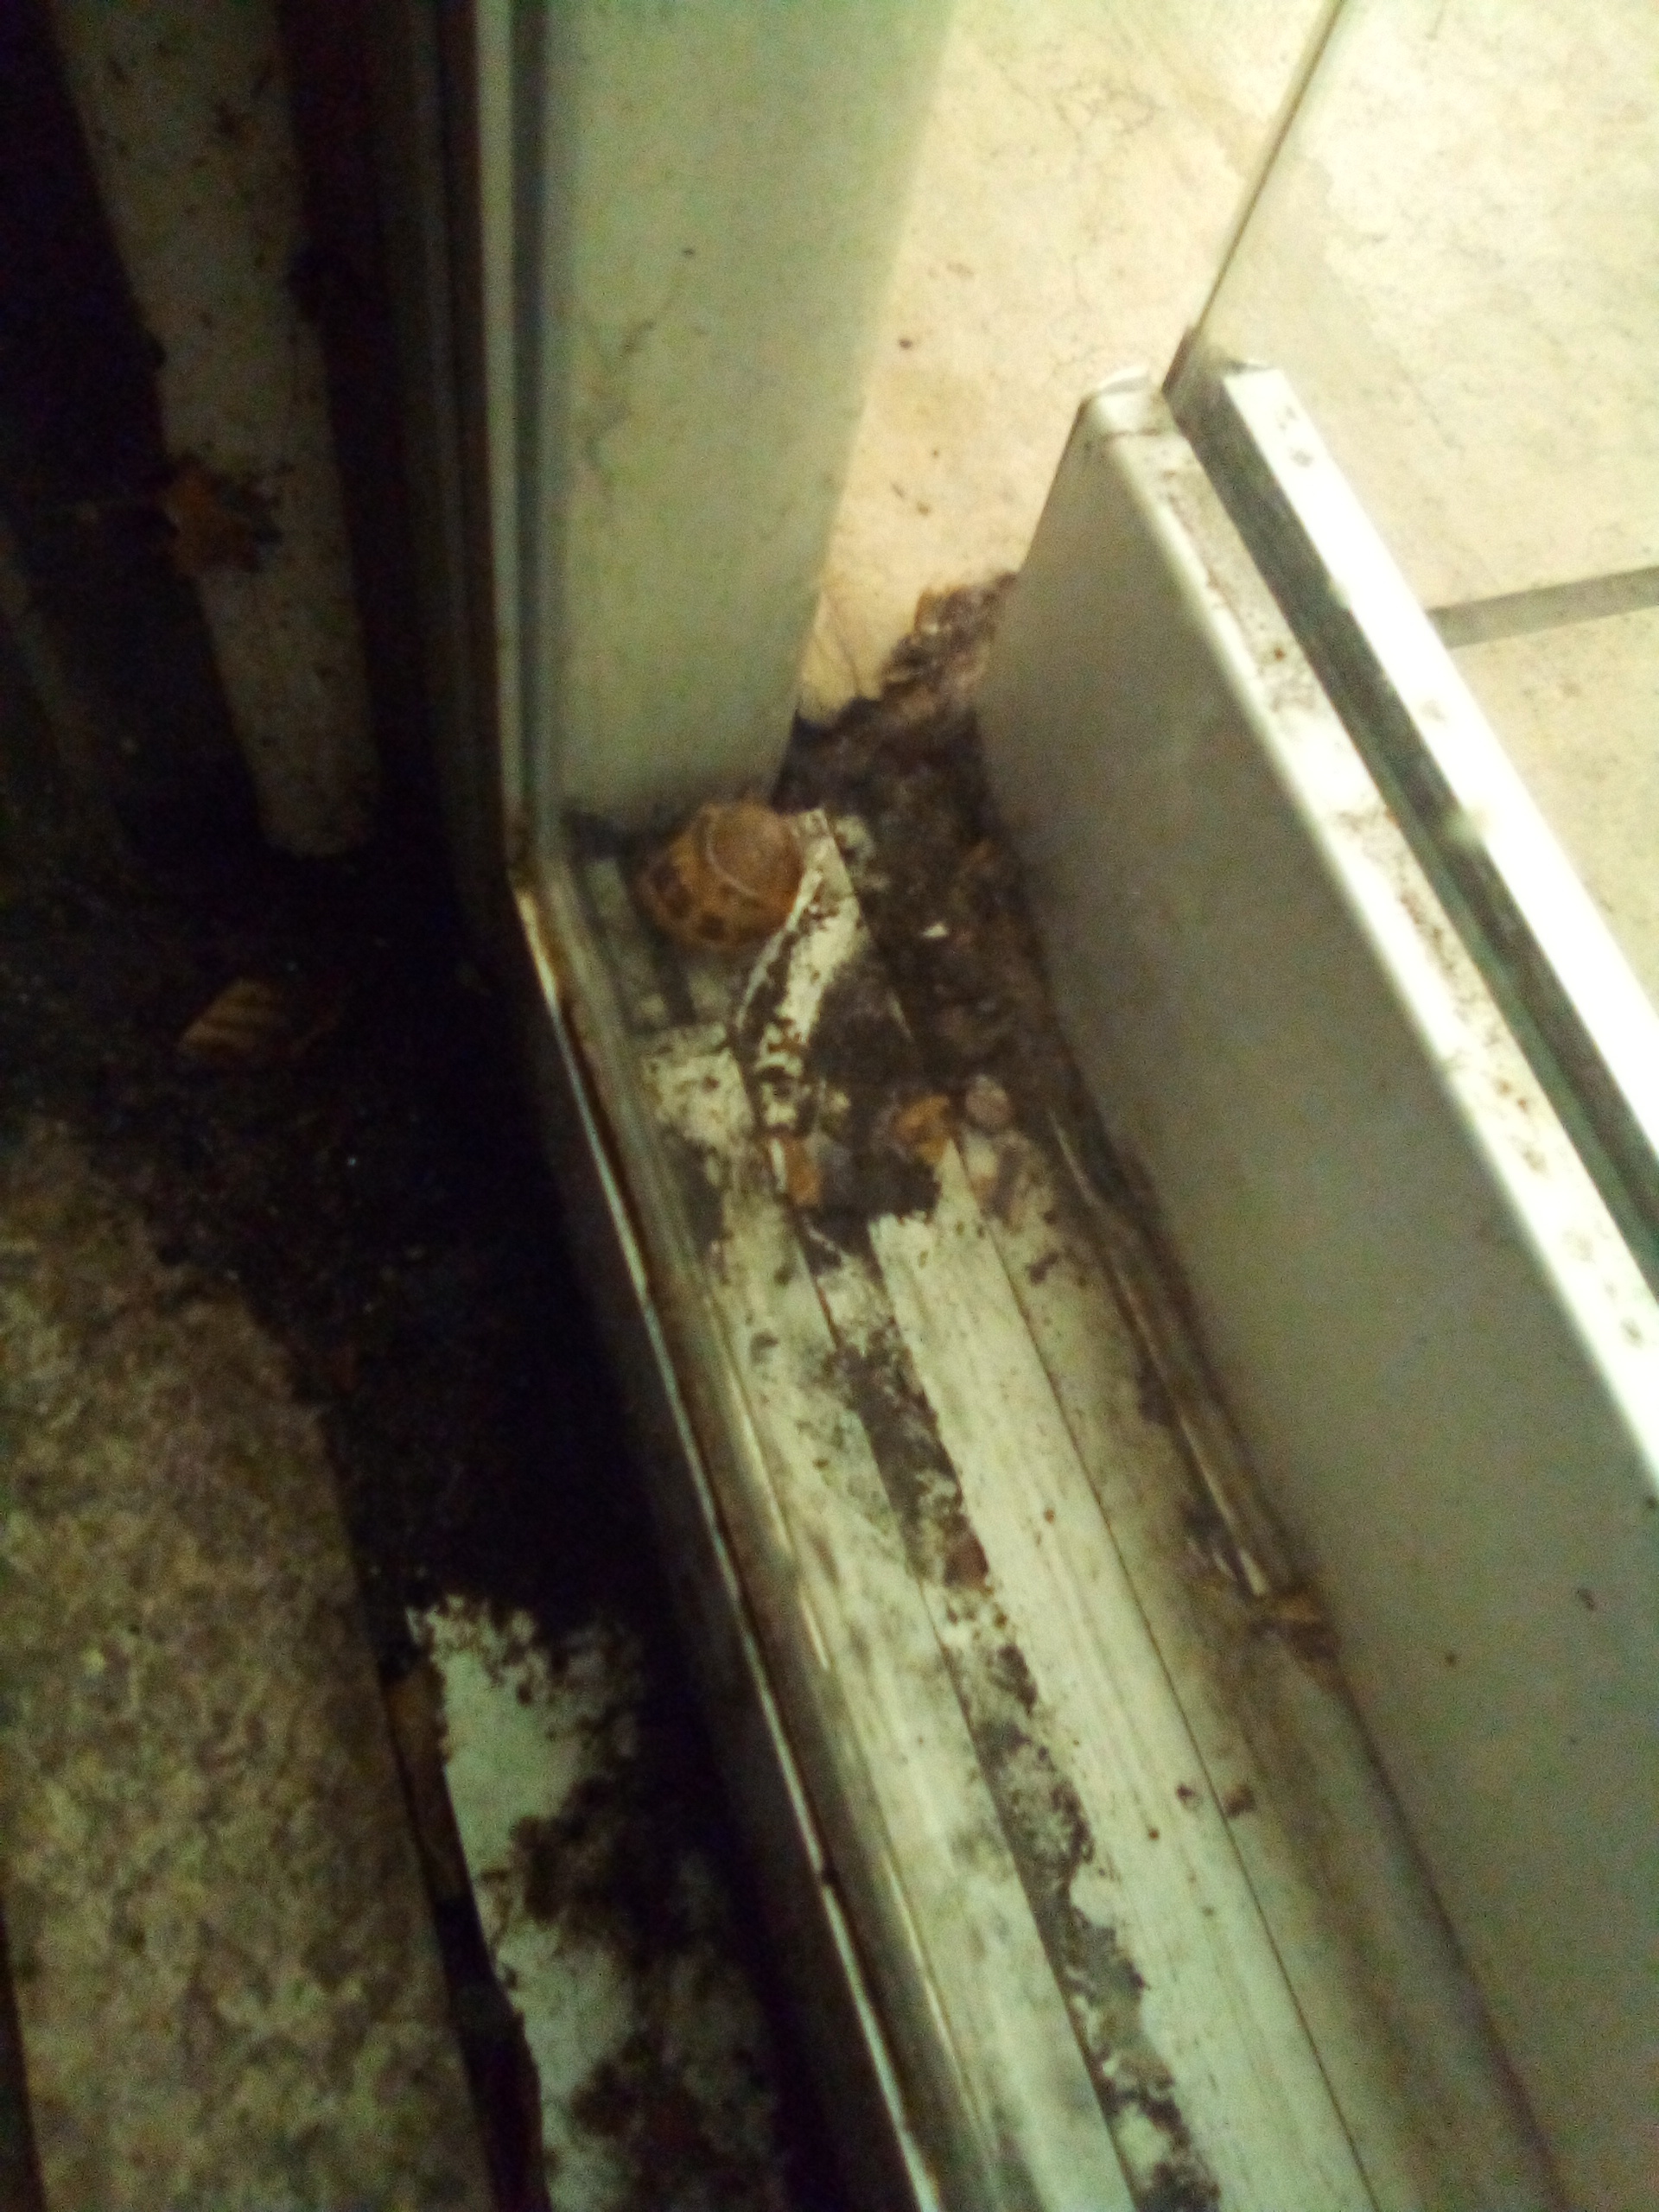 The concerned bus user thinks the mess at Blackburn bus station is unacceptable and needs to be cleaned 